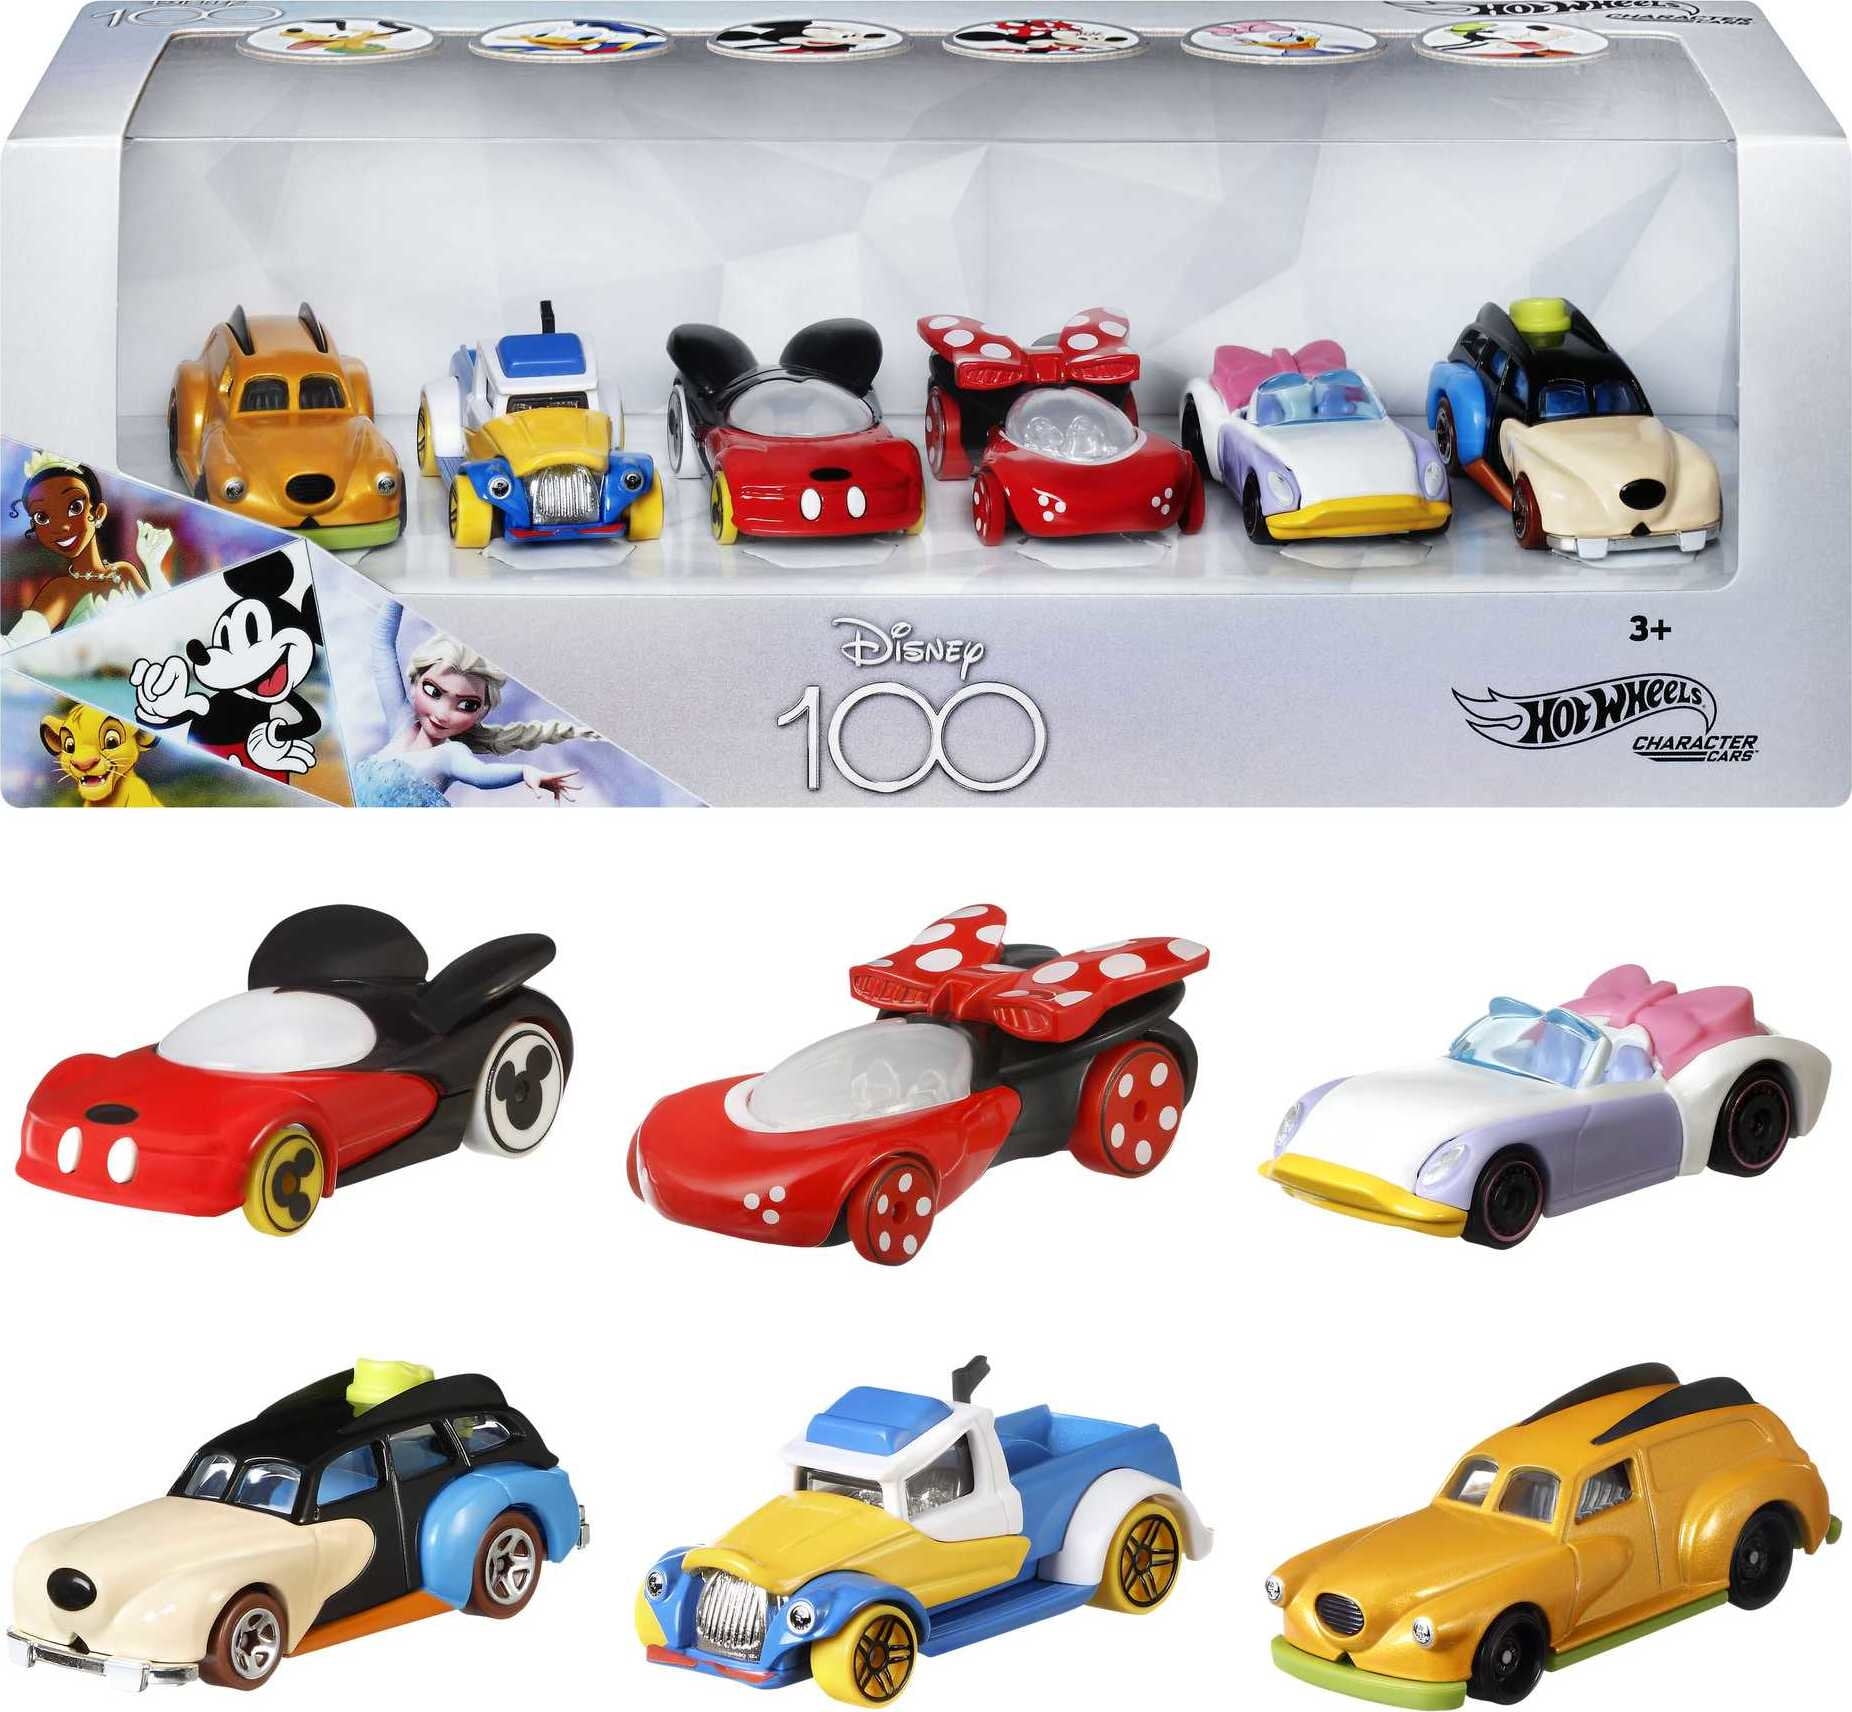 Hot Wheels Disney Character Cars, Set of 6 Toy Cars in 164 Scale